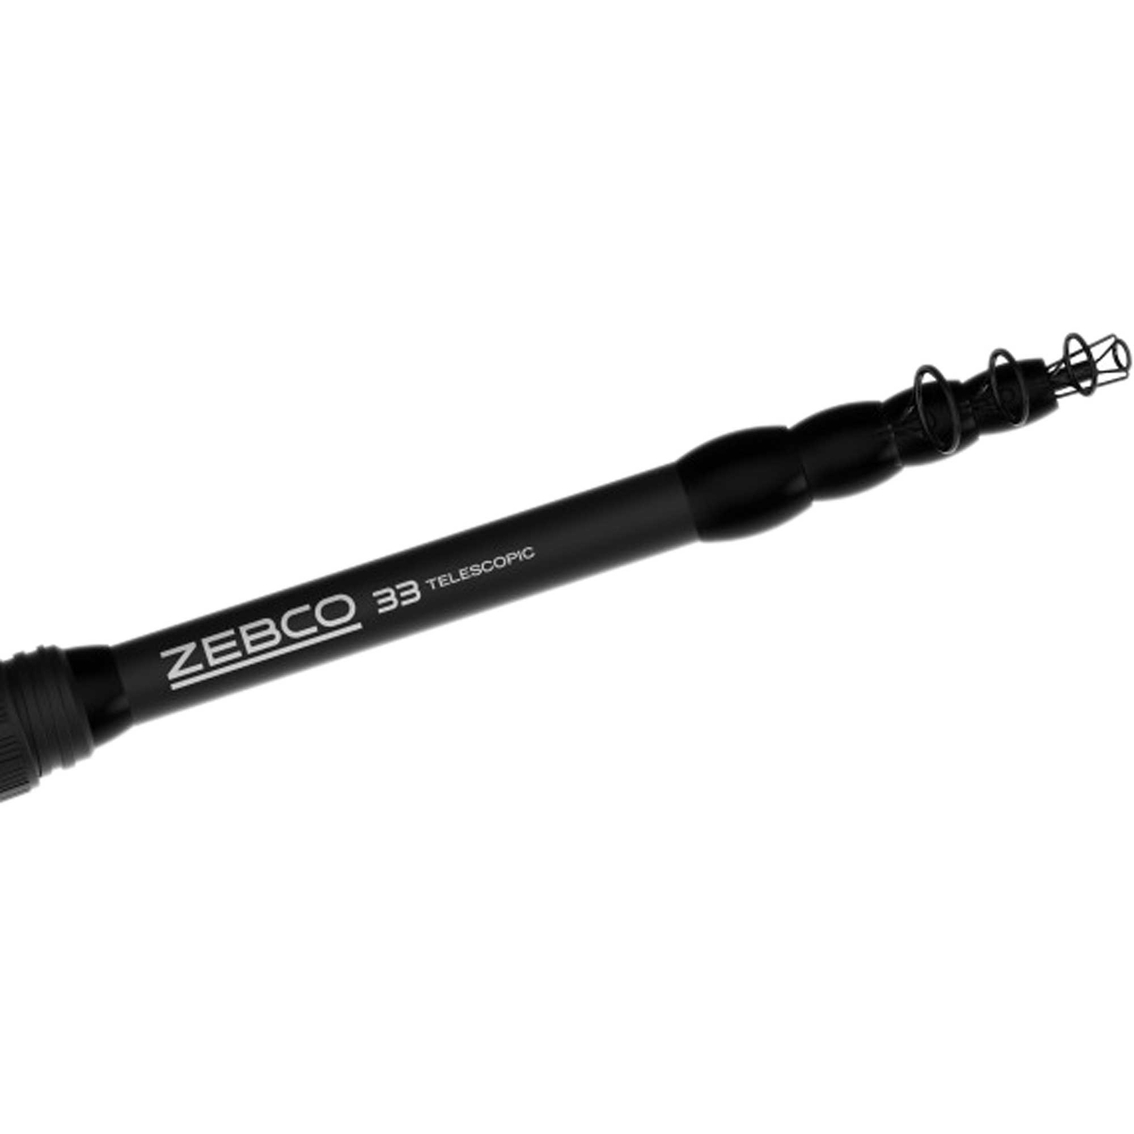 Zebco Telecast Fishing Rod and Reel - Image 6 of 8